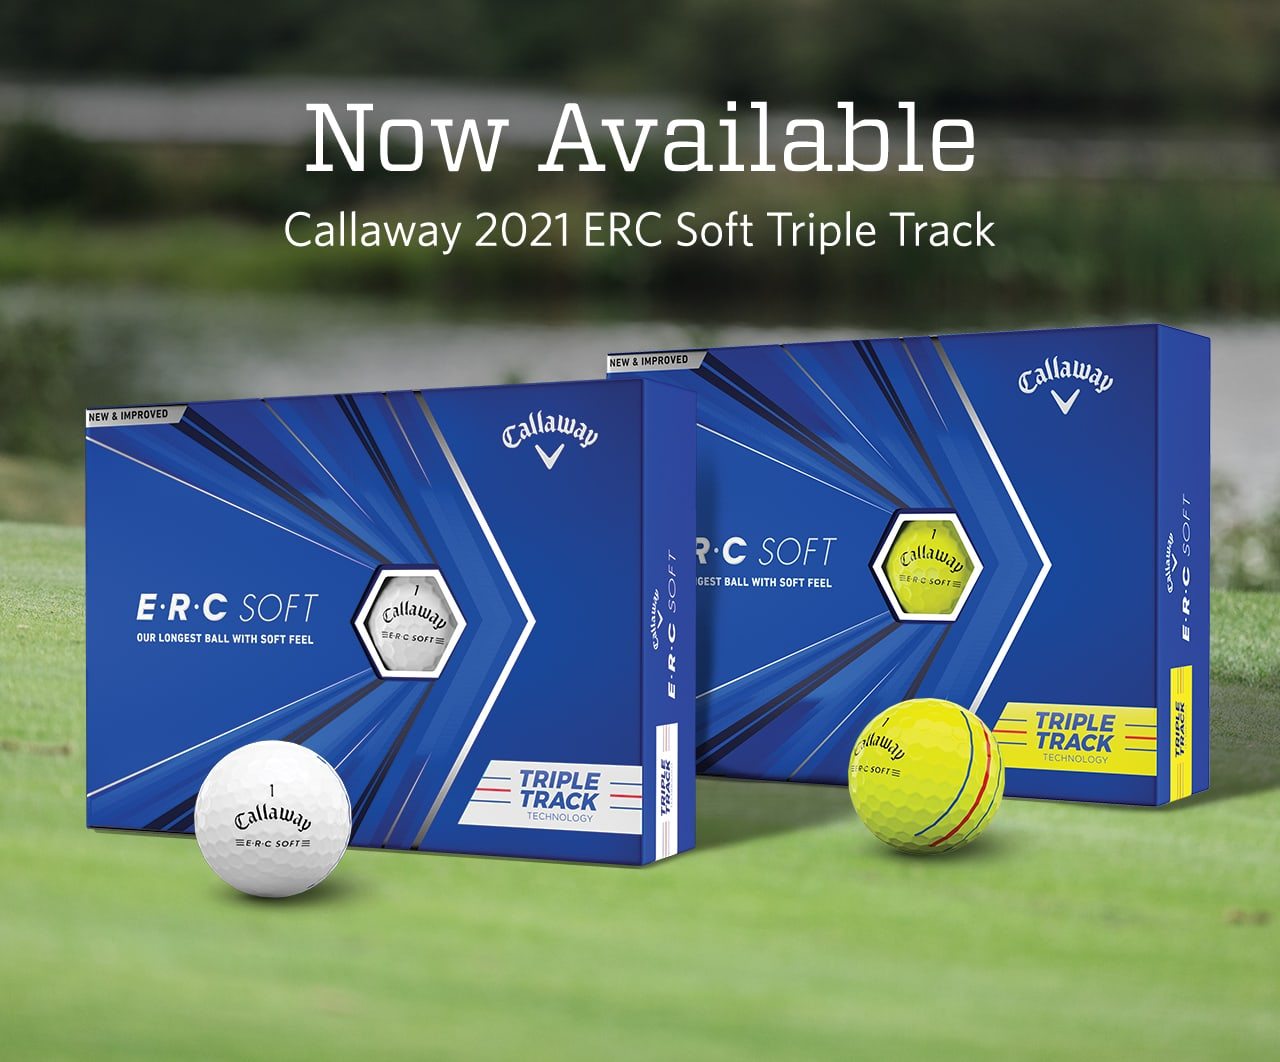 Now available. Callaway 2021 ERC Soft Triple Track.